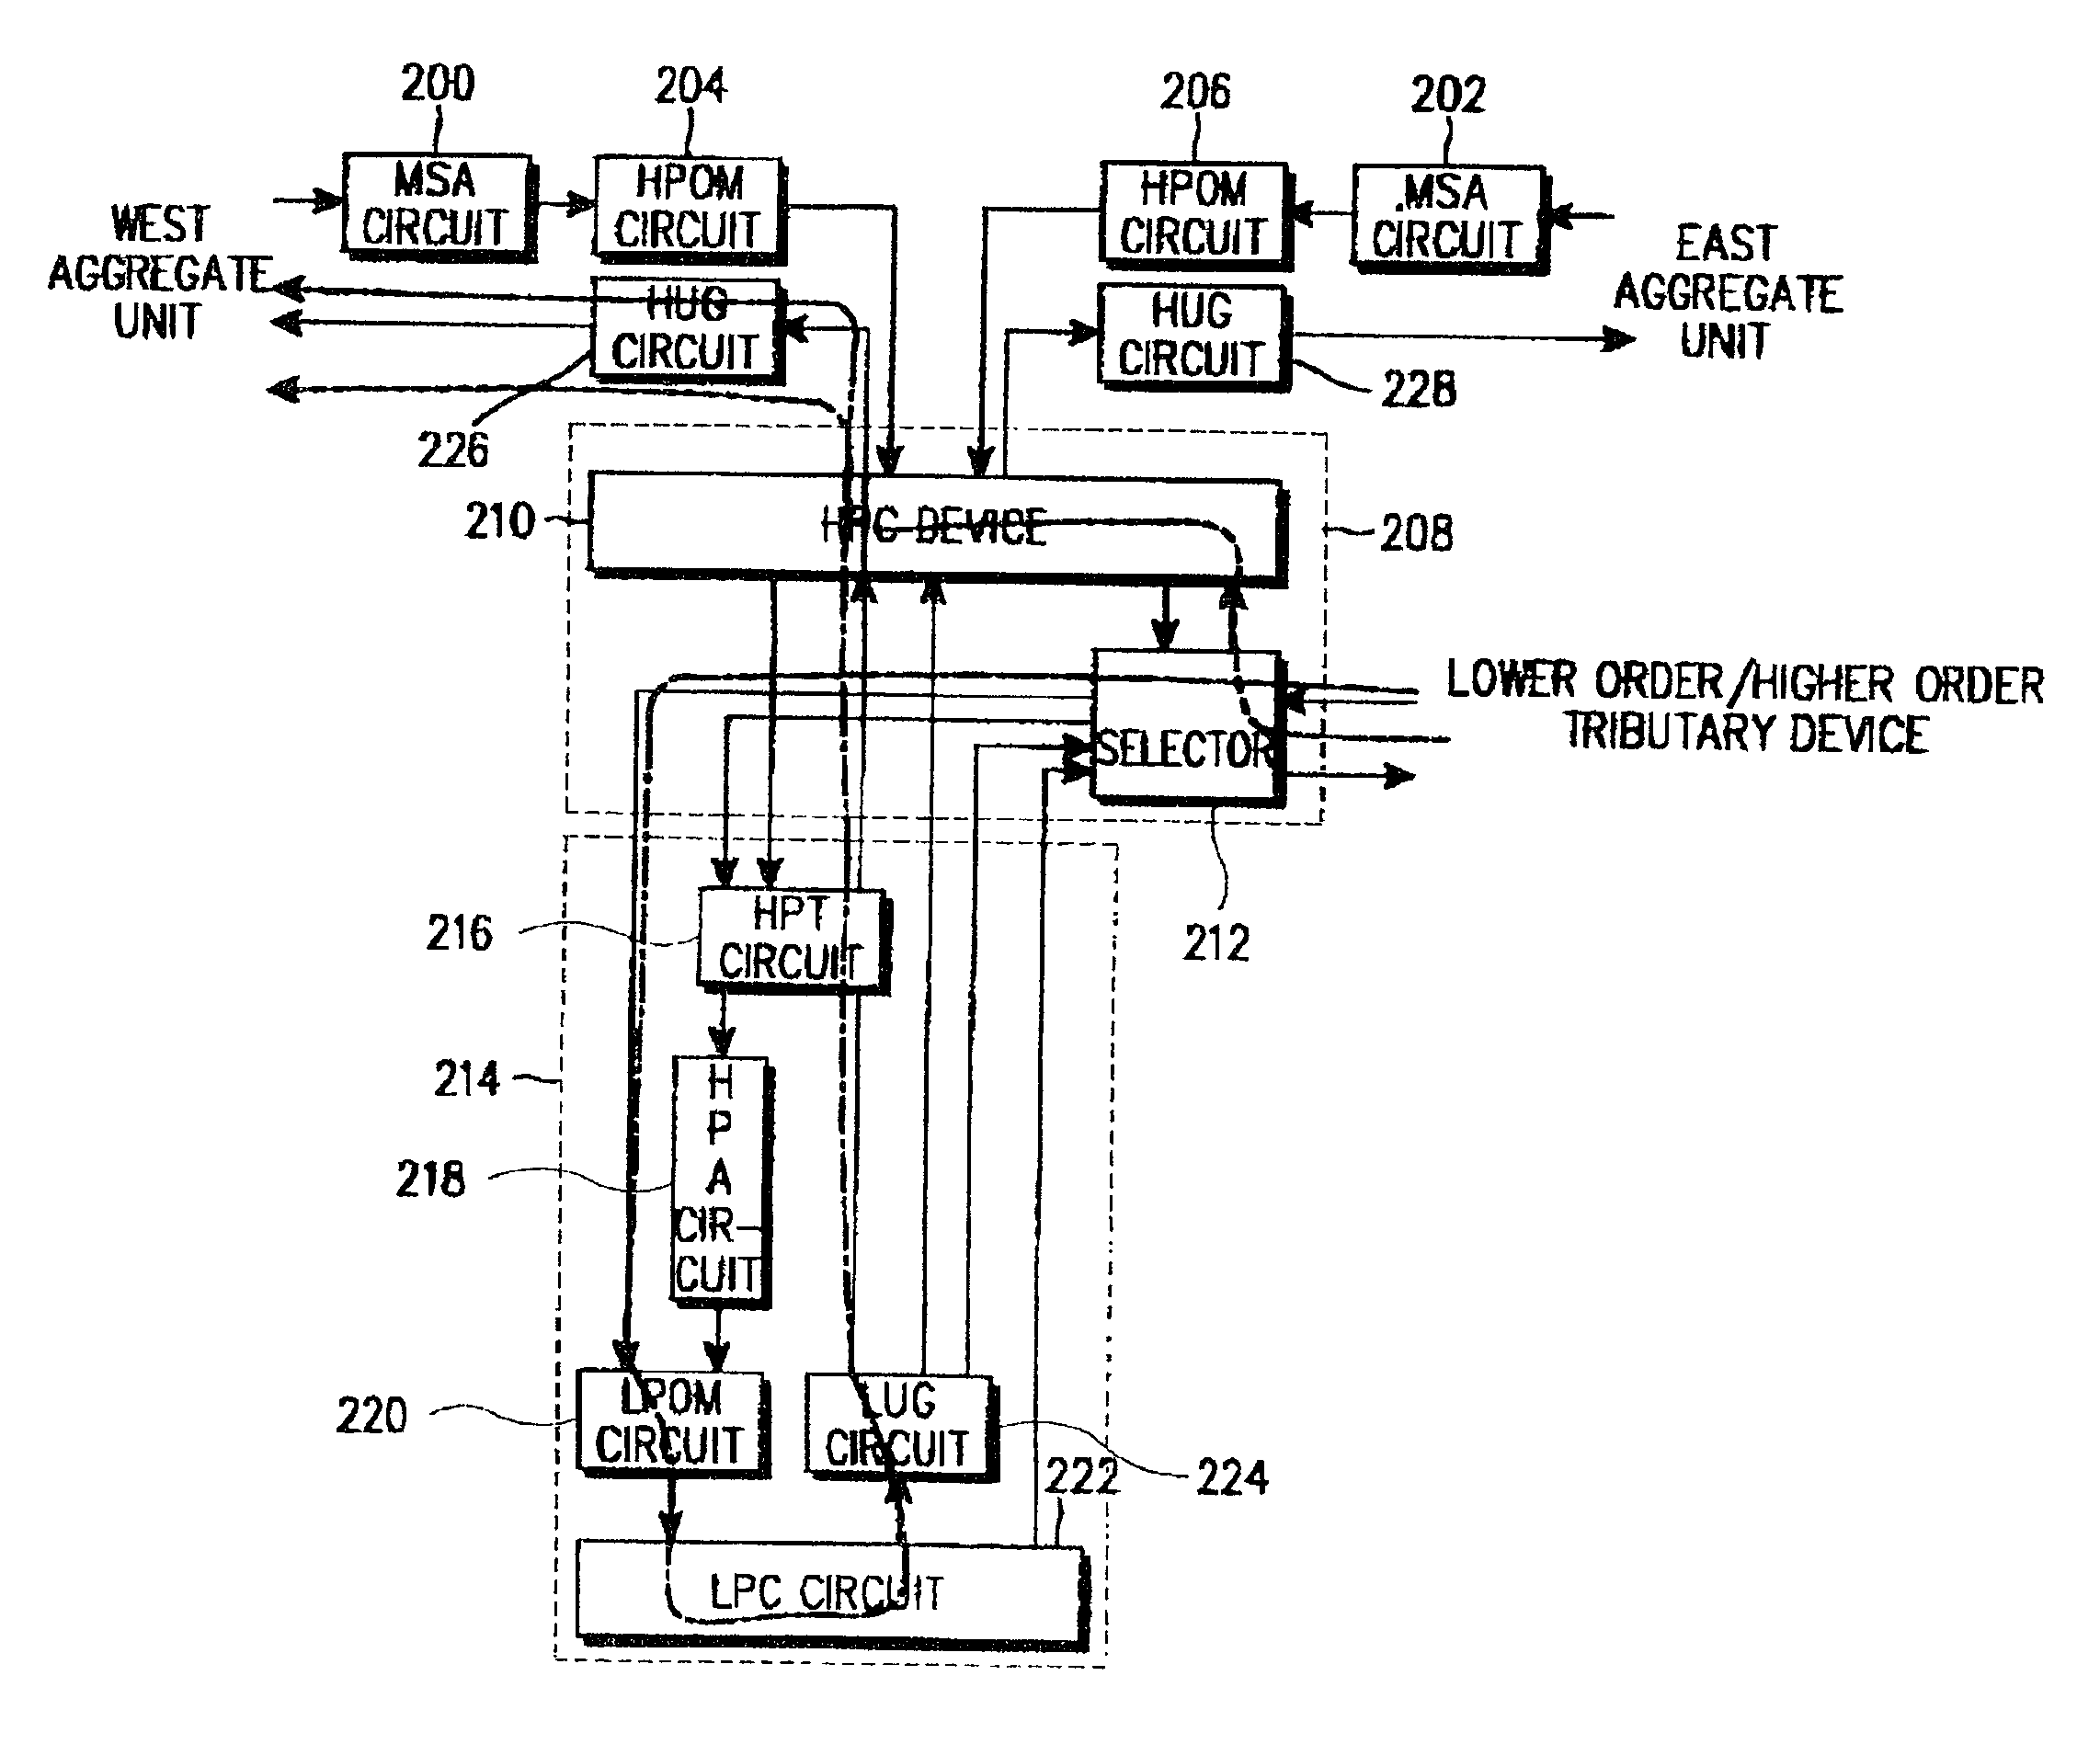 Add/drop cross connection apparatus for synchronous digital hierarchy